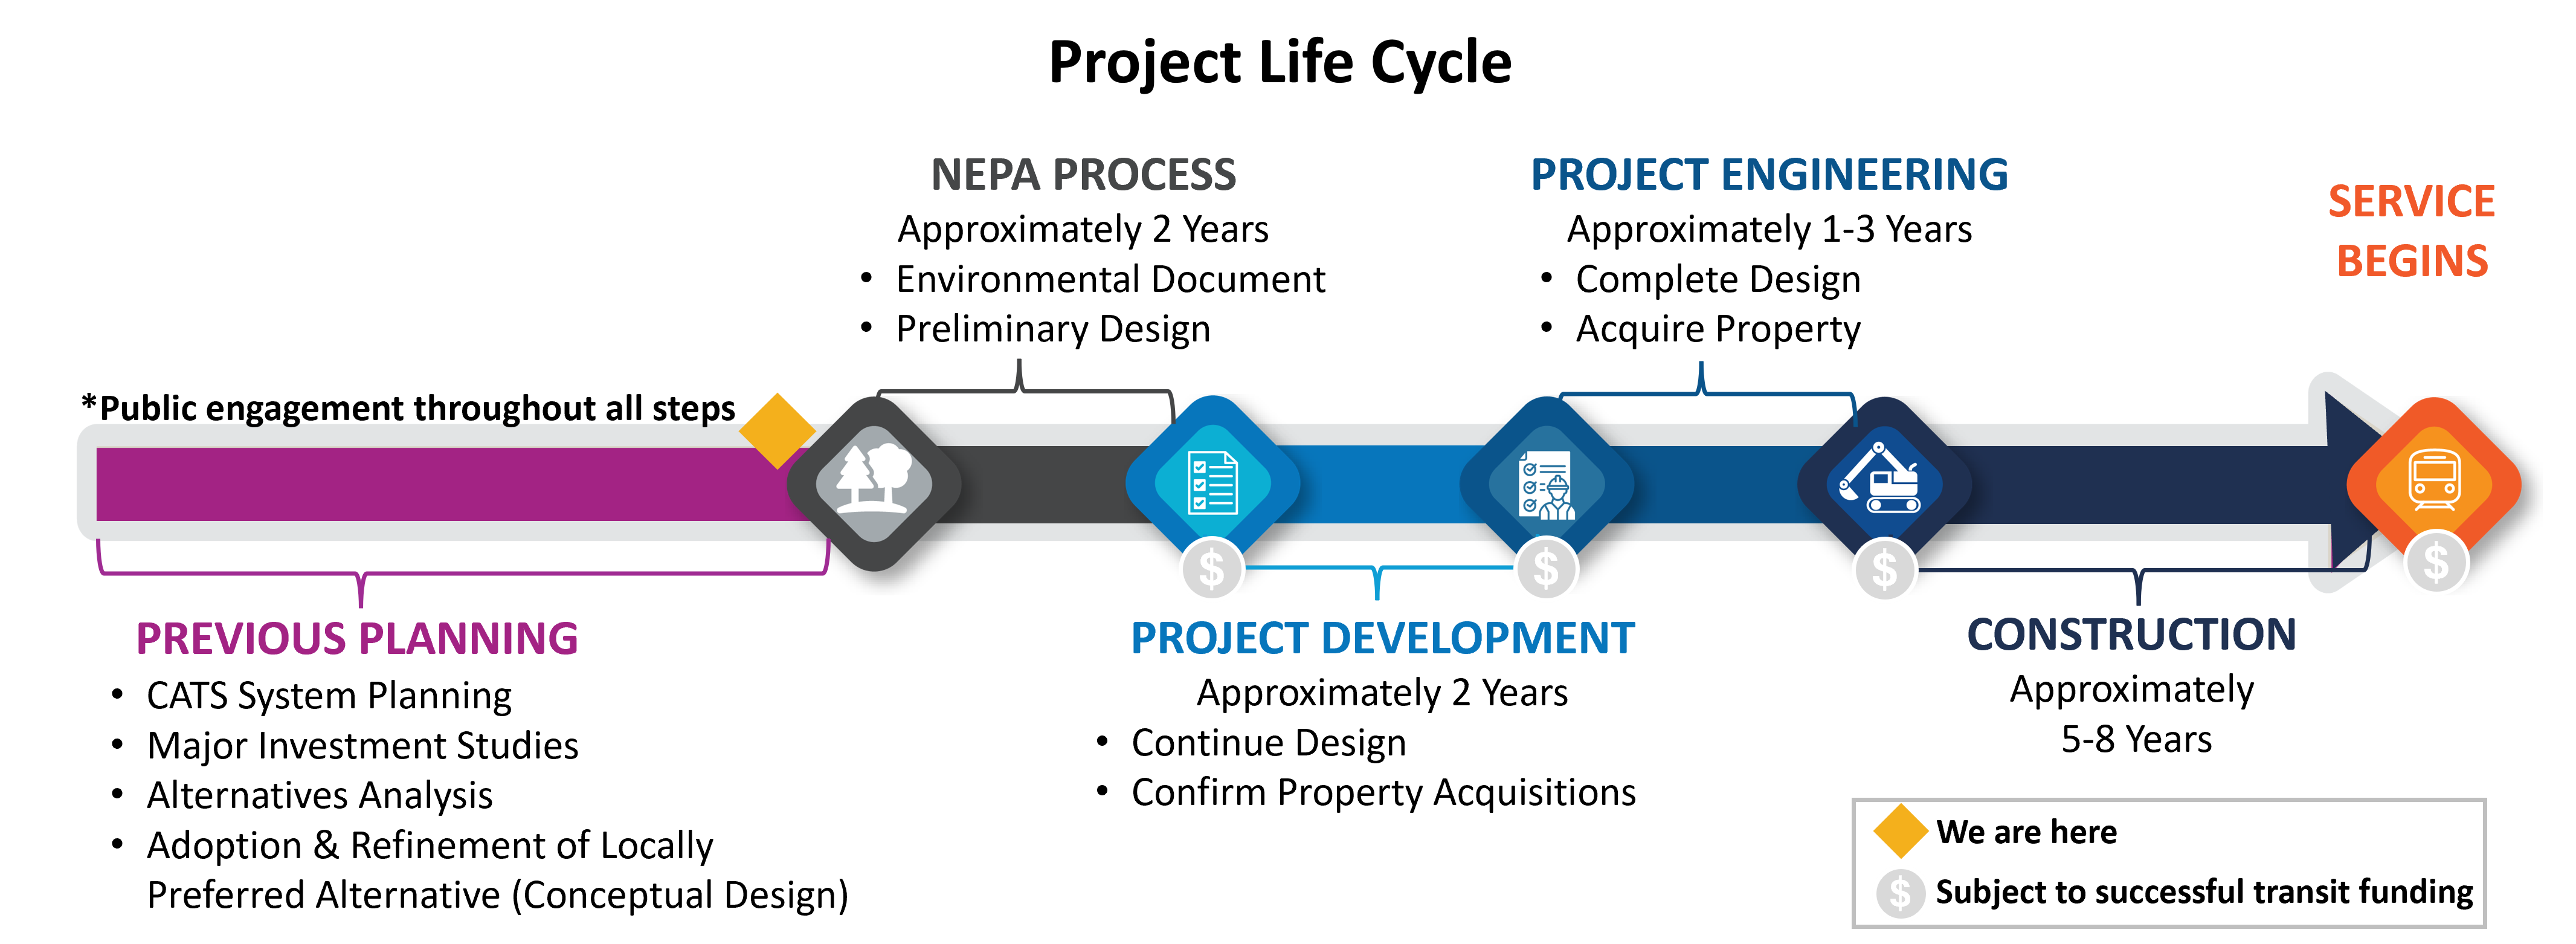 The project life cycle contains previous planning, NEPA process, project development and engineering, construction and the service begins 